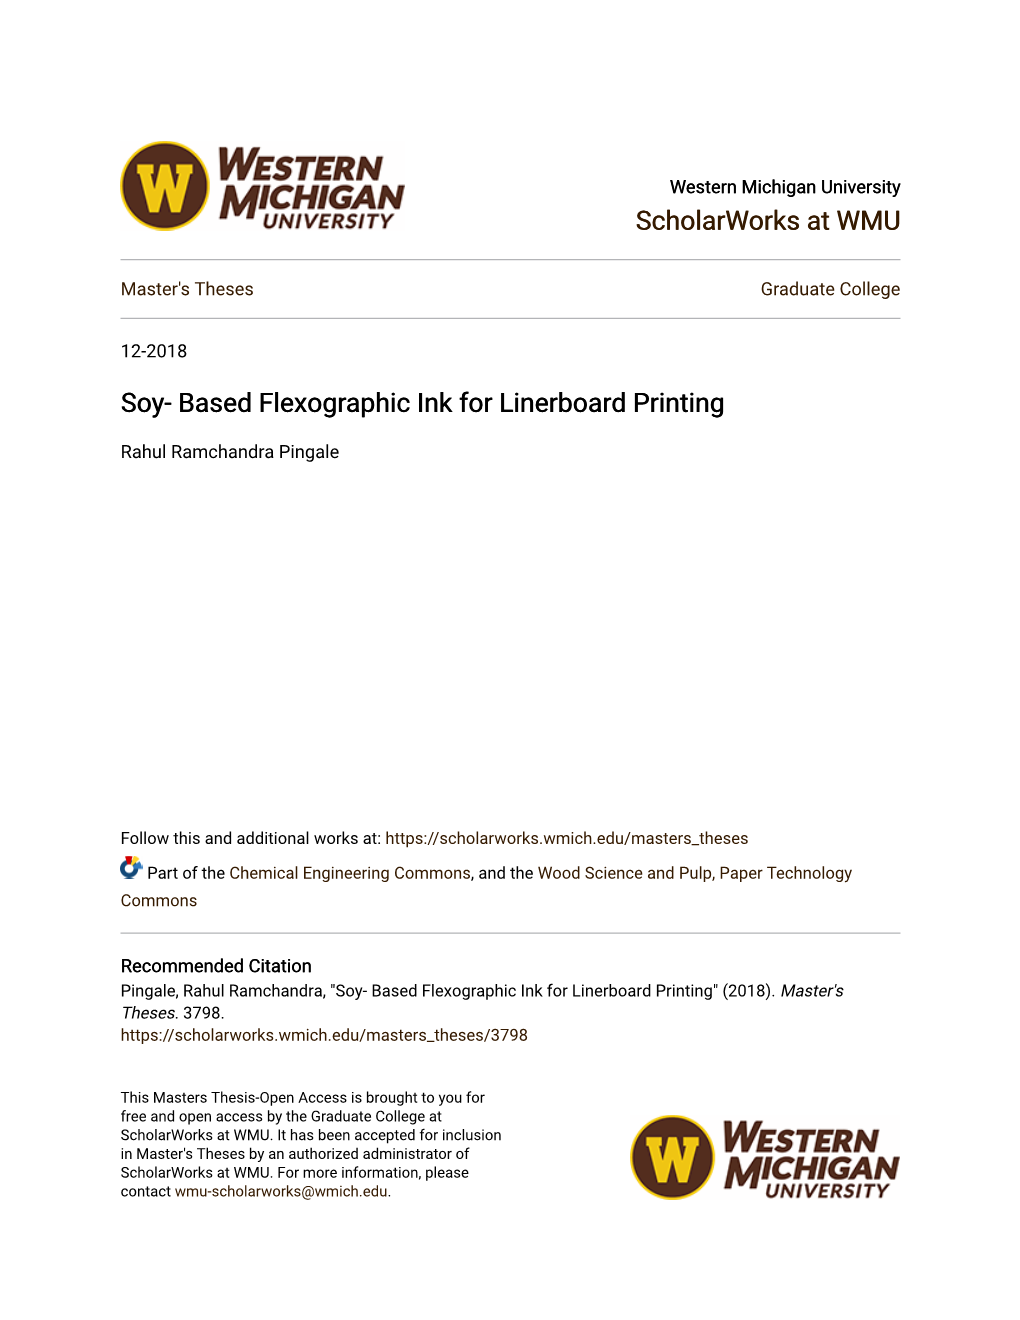 Soy- Based Flexographic Ink for Linerboard Printing